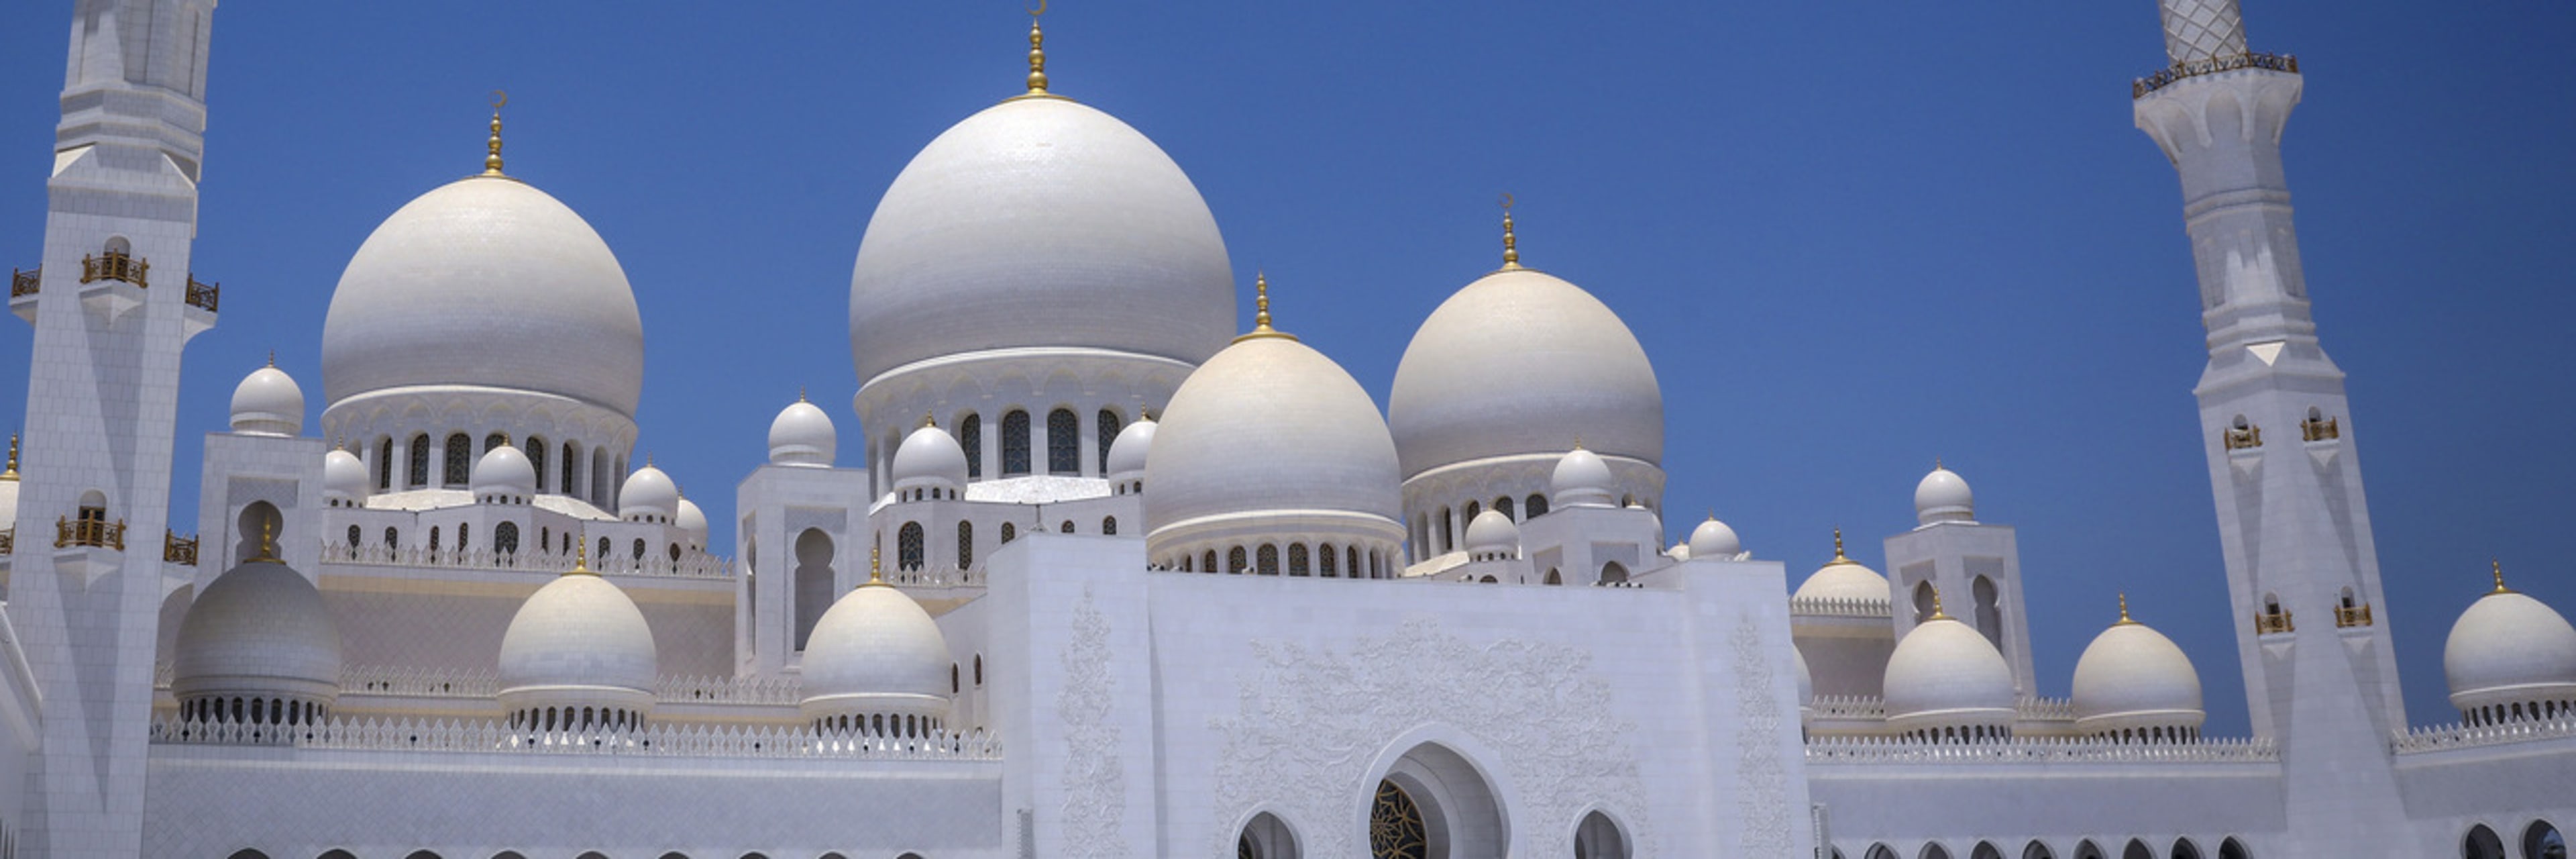 Minarets and domes at the Sheikh Zayed Grand Mosque in Abu Dhabi.